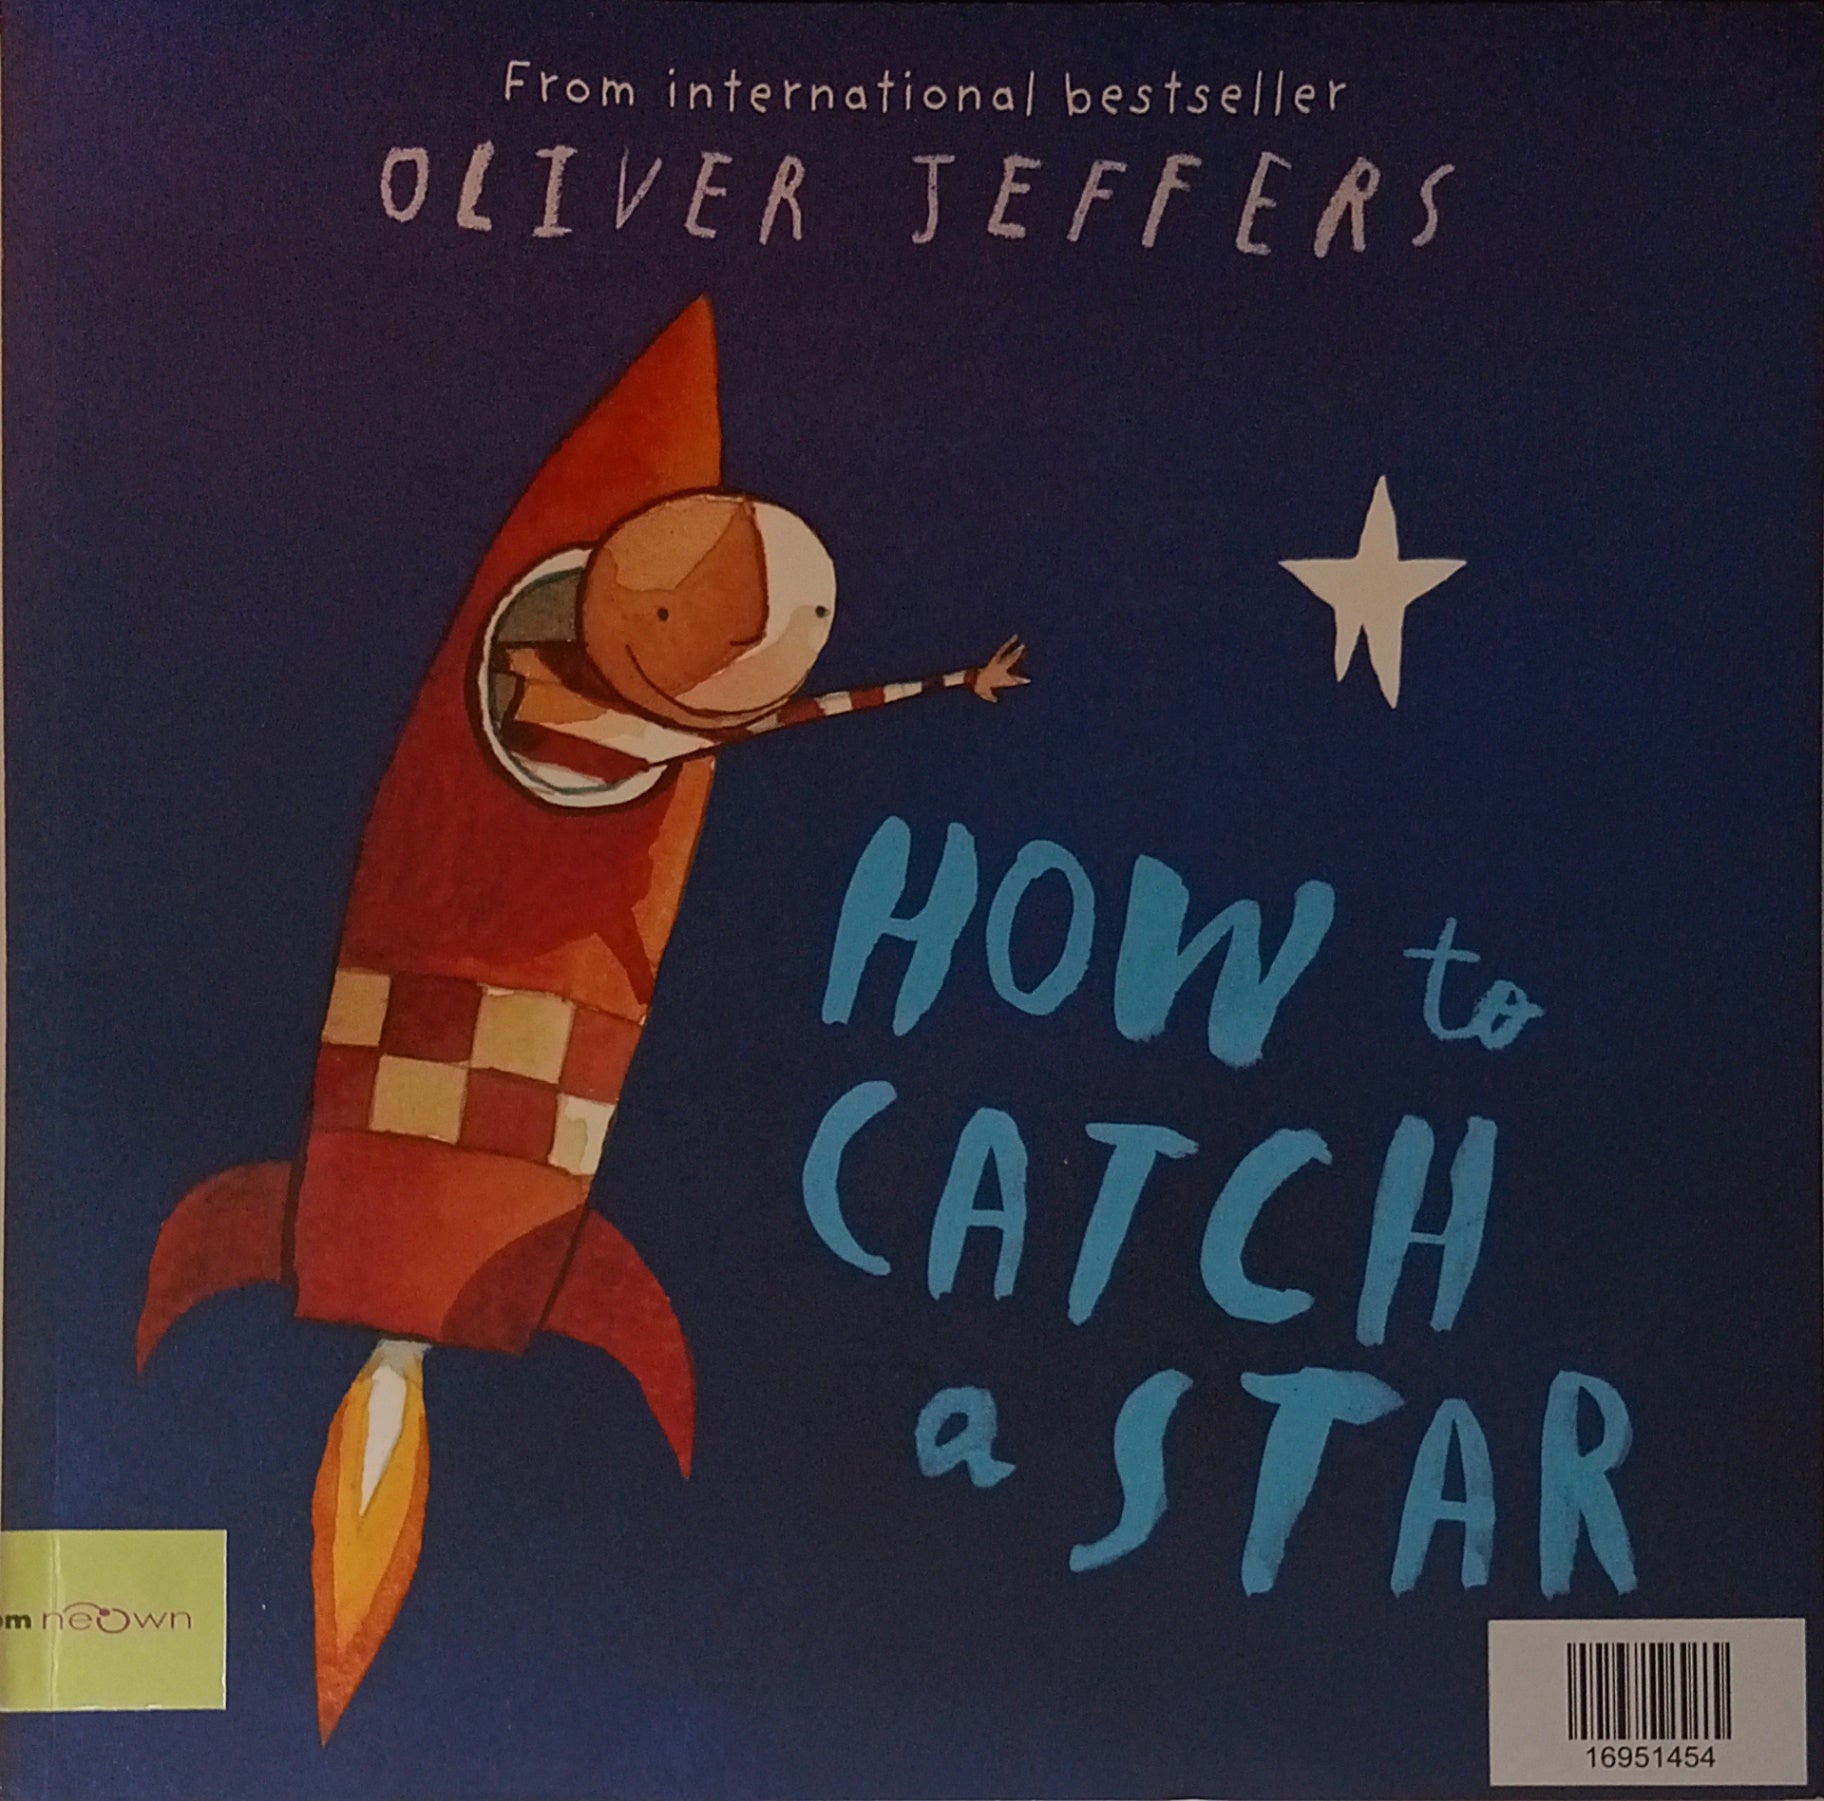 How To Catch A Star